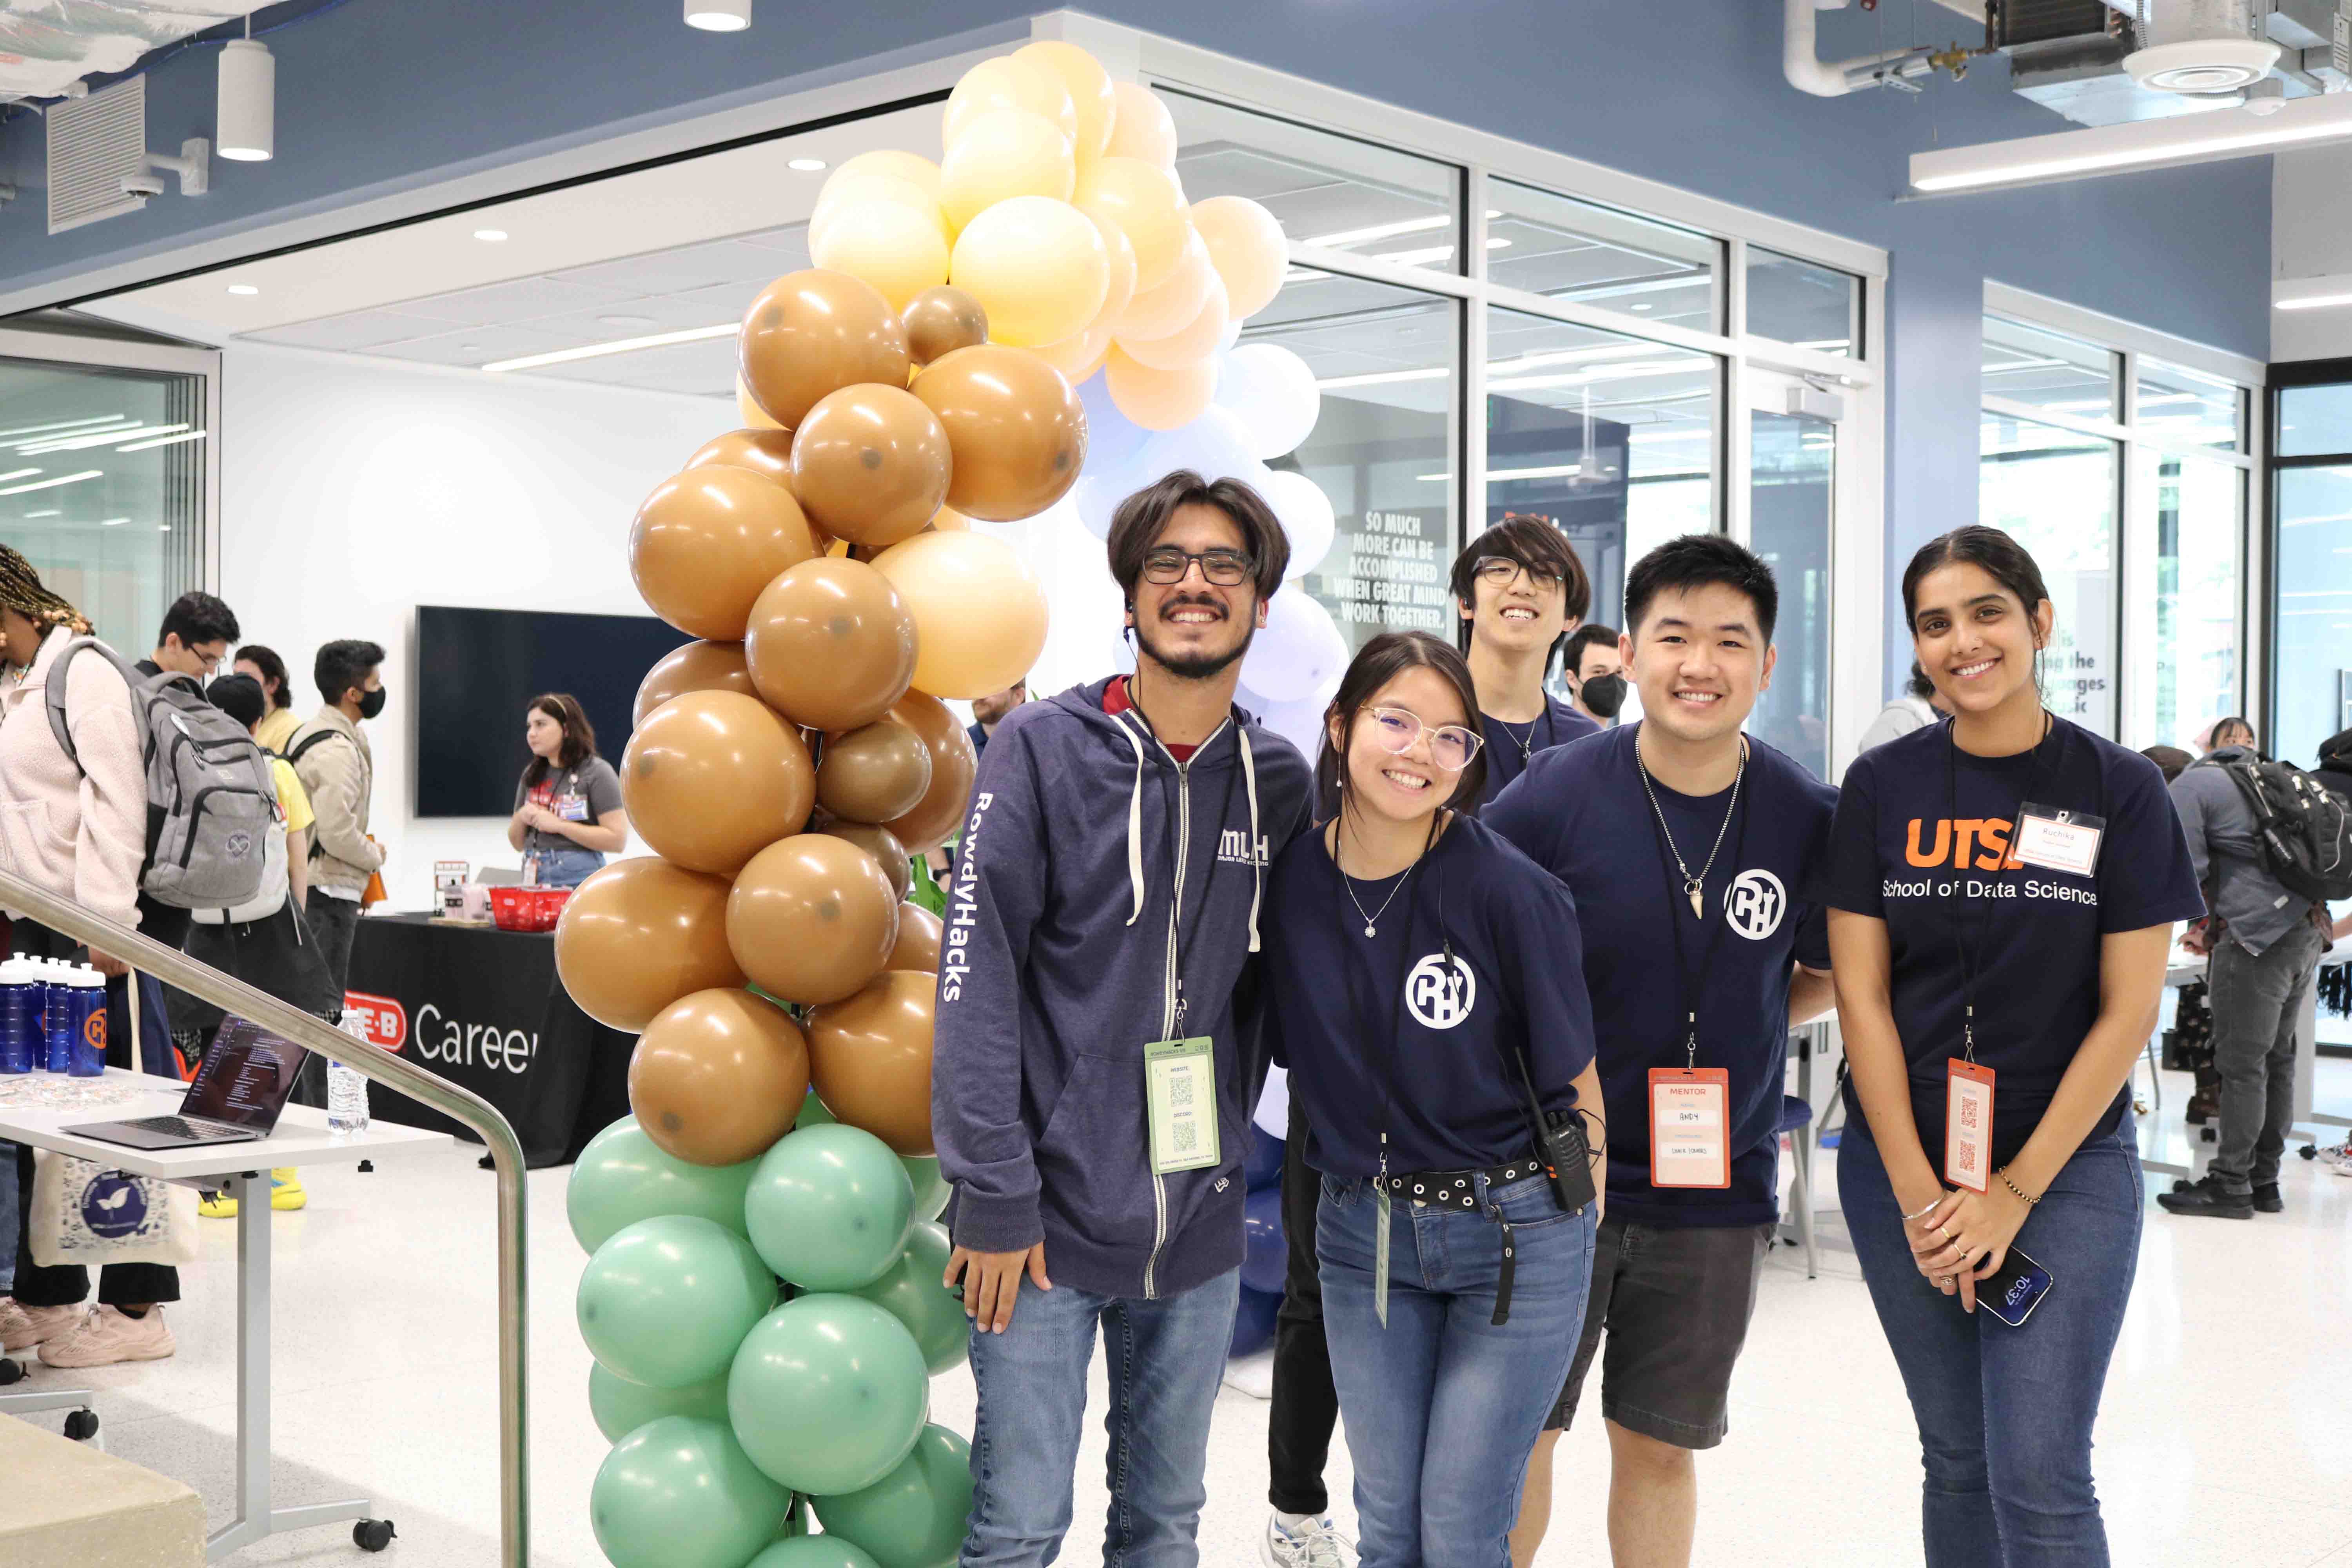 Group photo of students at an event